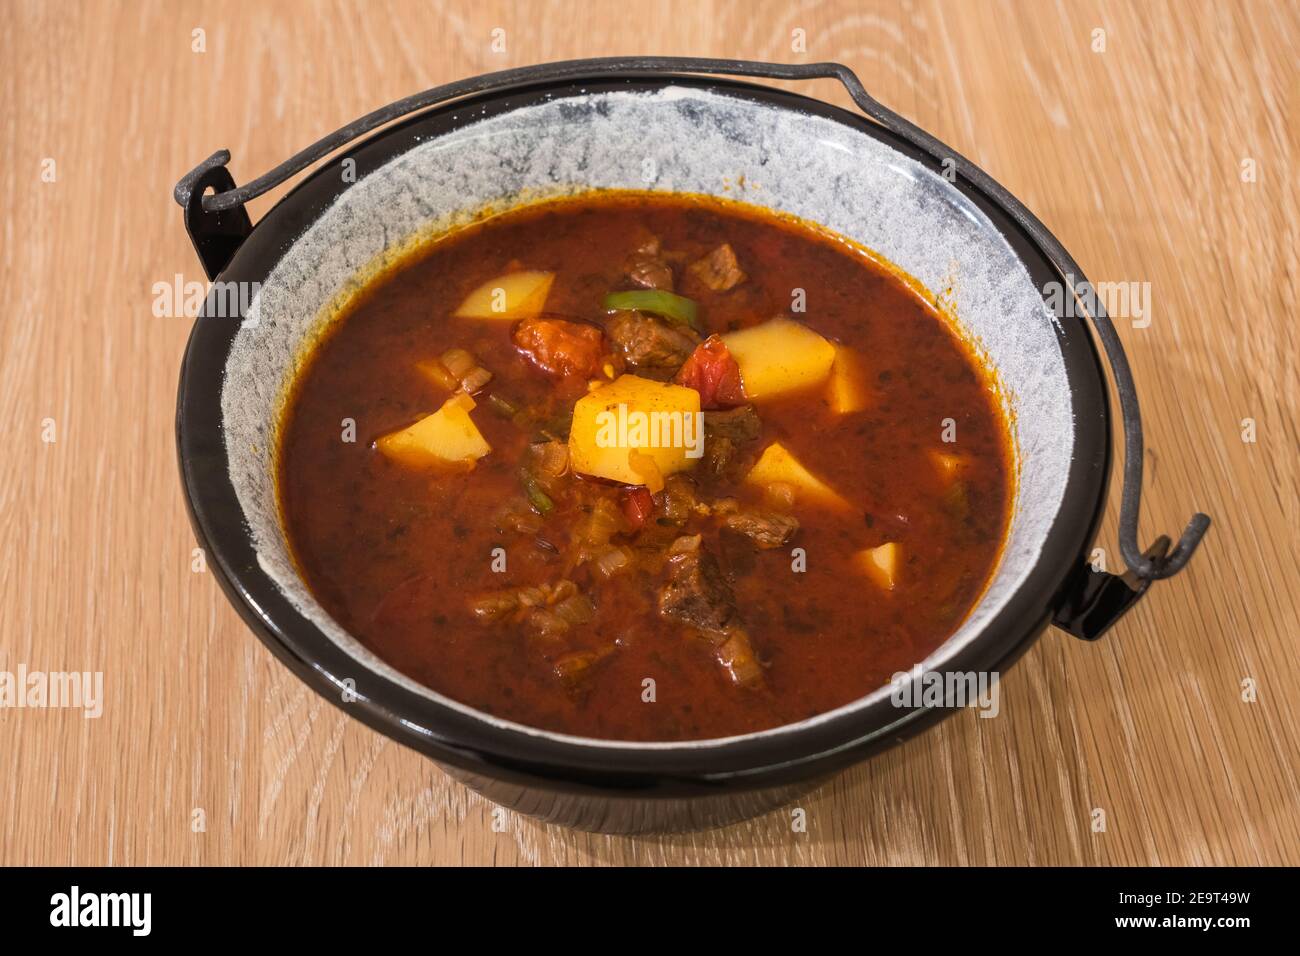 Hungarian Beef Goulash or Gulyas Soup or Stew Served in a Small Cauldron with Potatoes, Meat, Paprika and Pepper Stock Photo